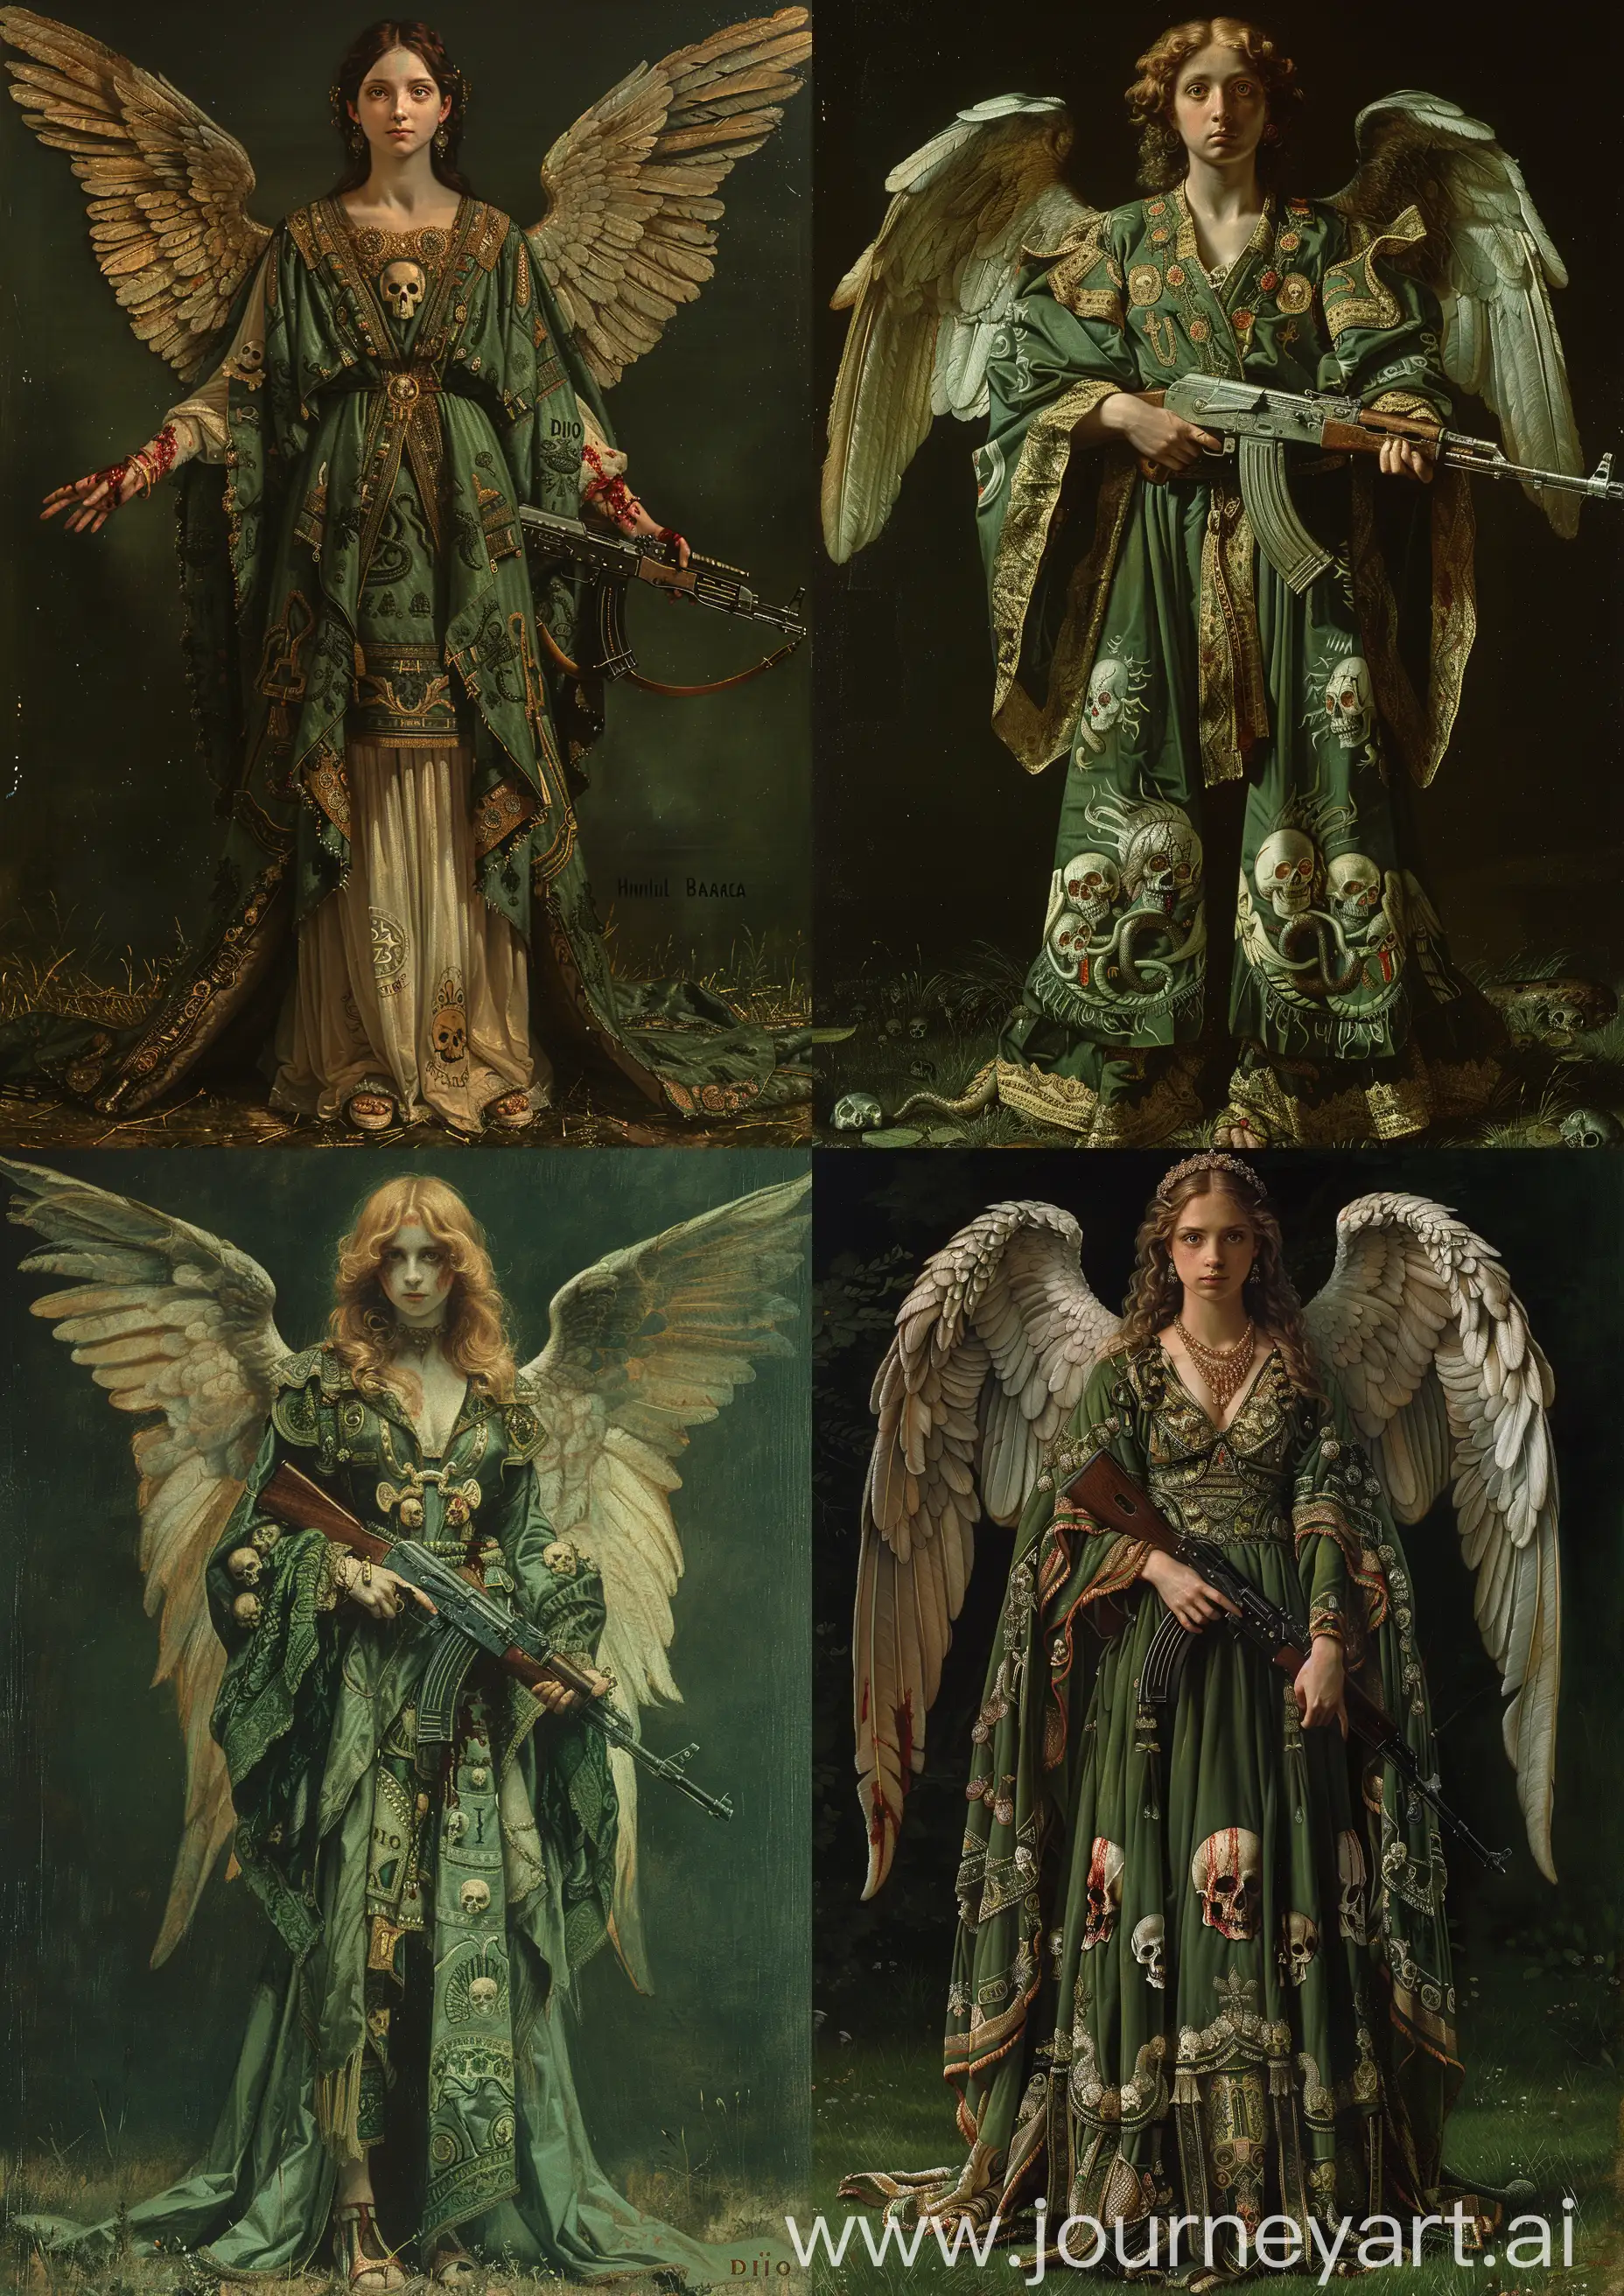 DIDO-Mythical-Queen-with-Angel-Wings-and-Kalashnikov-in-Ornate-Blood-Robes